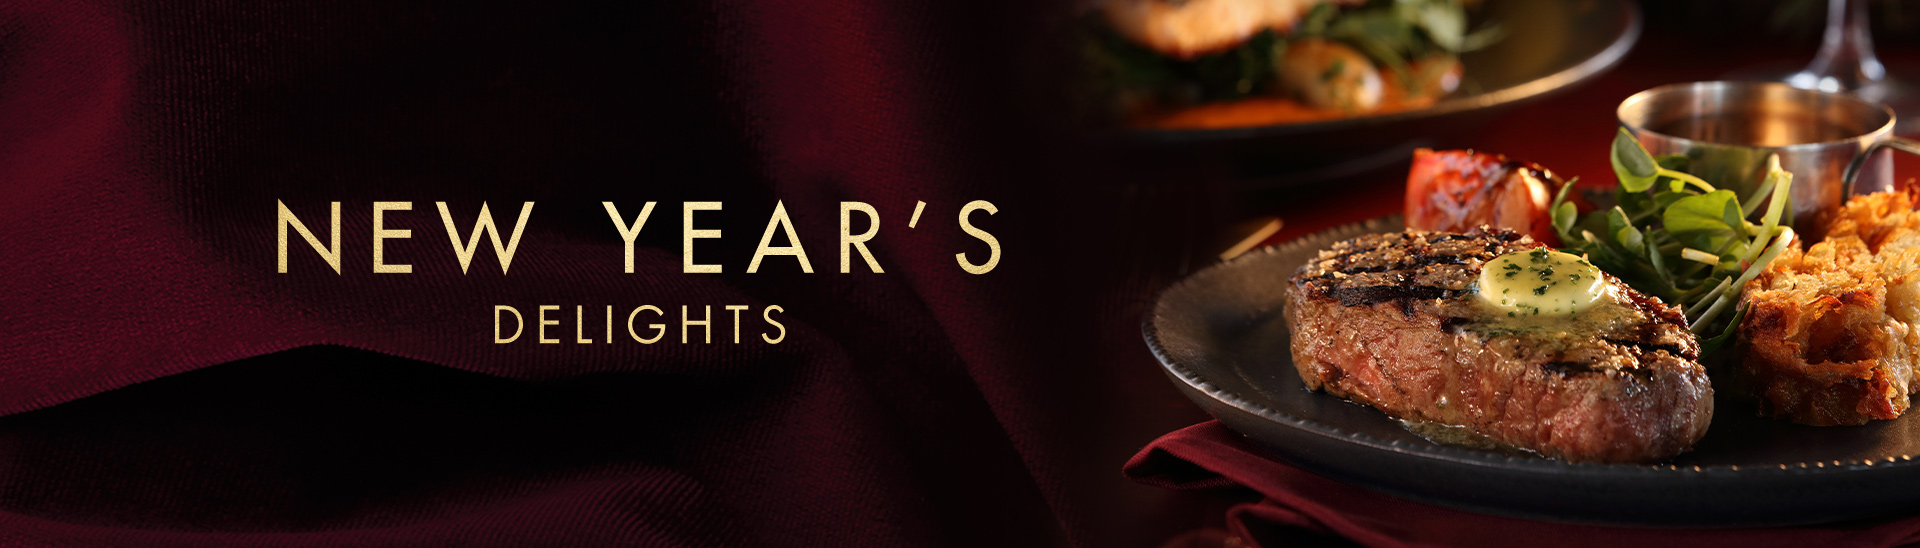 New Year’s Eve 2019 at Miller & Carter Exeter